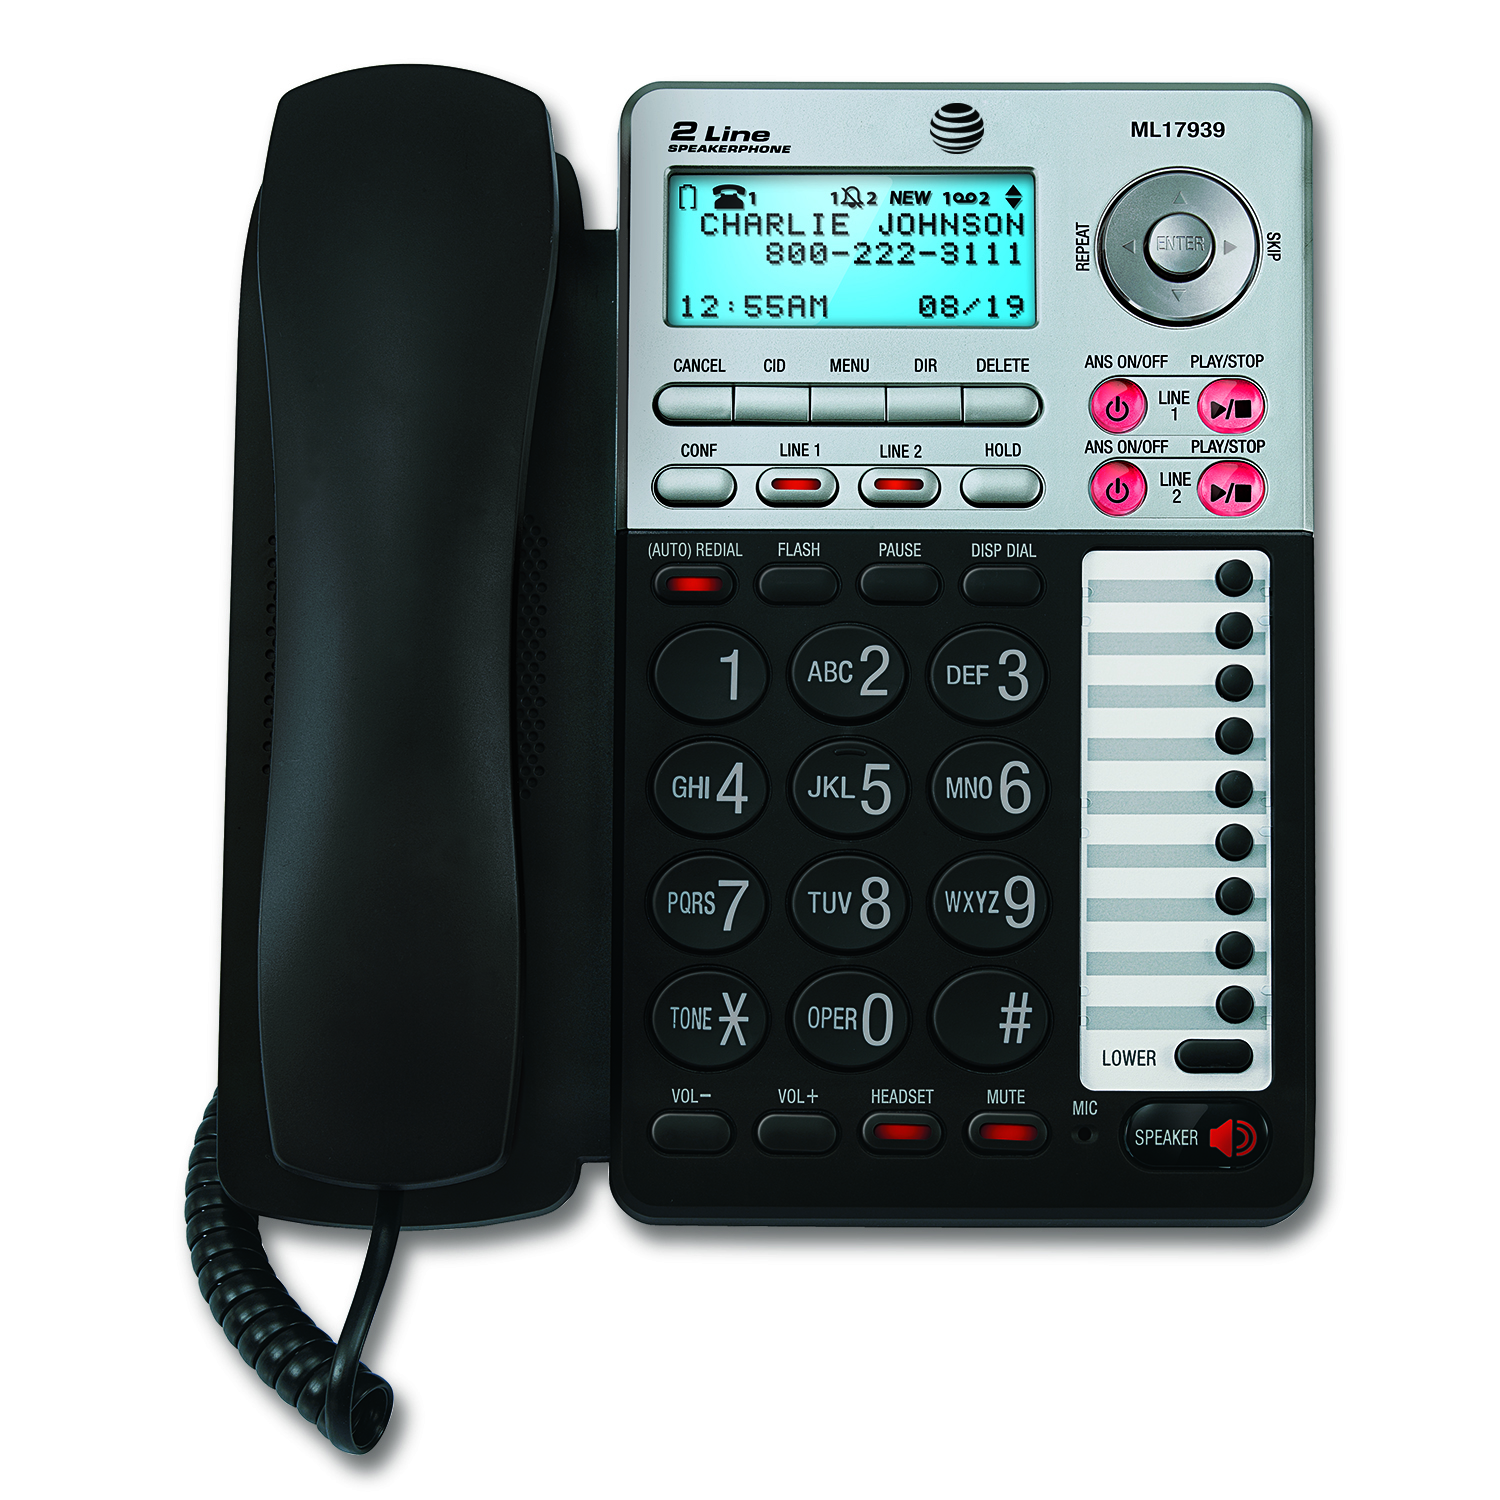 AT&T ML17939 2-Line Speakerphone with Caller ID and Digital Answering System - image 1 of 5